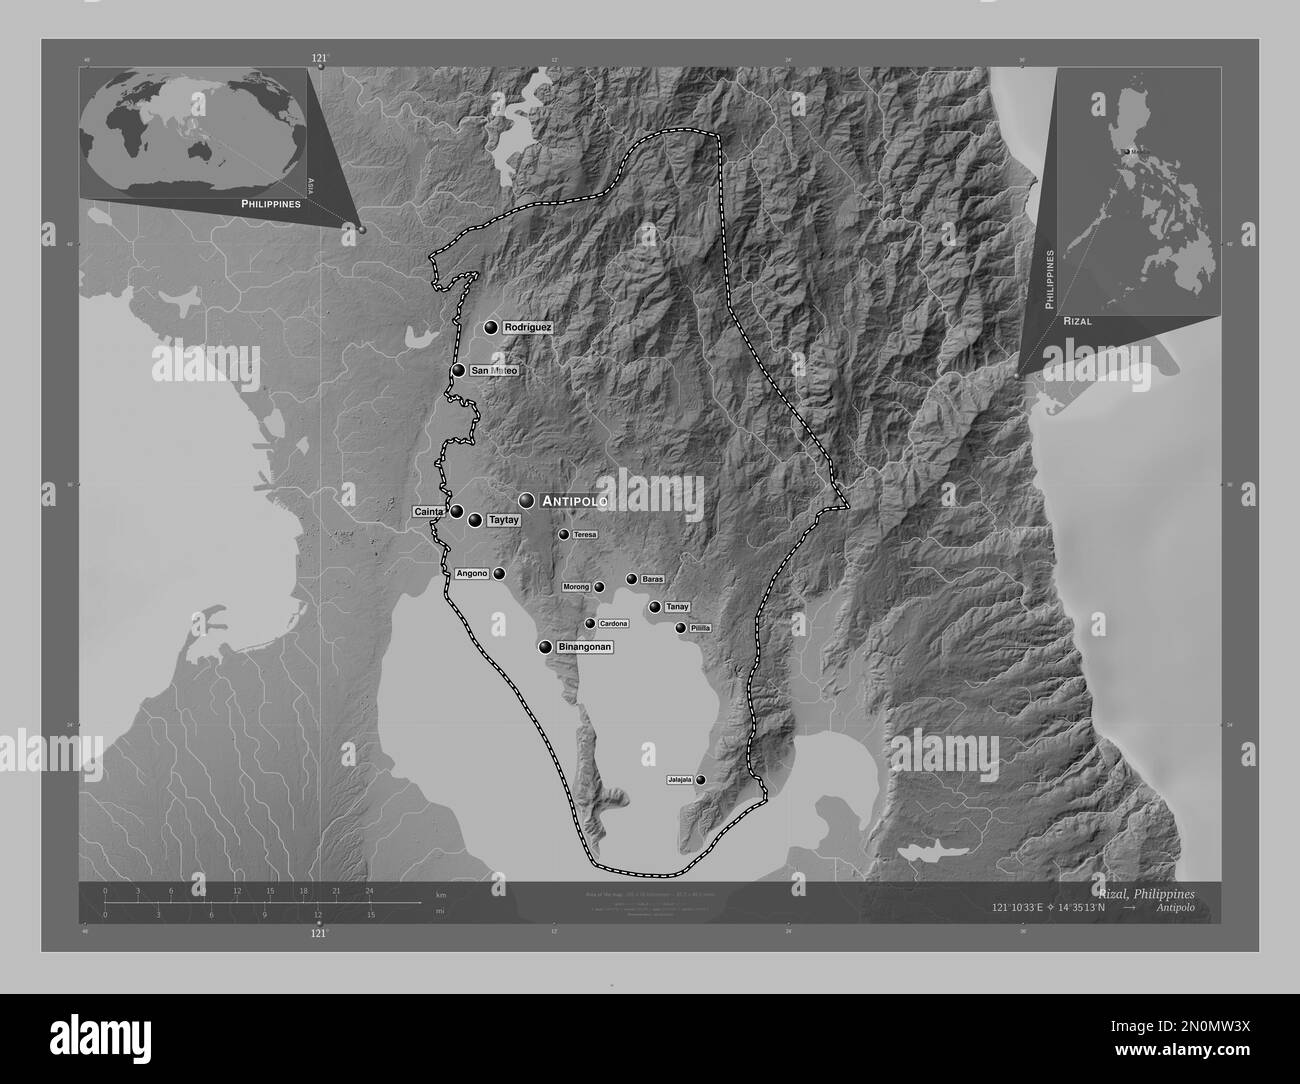 Rizal, province of Philippines. Grayscale elevation map with lakes and rivers. Locations and names of major cities of the region. Corner auxiliary loc Stock Photo